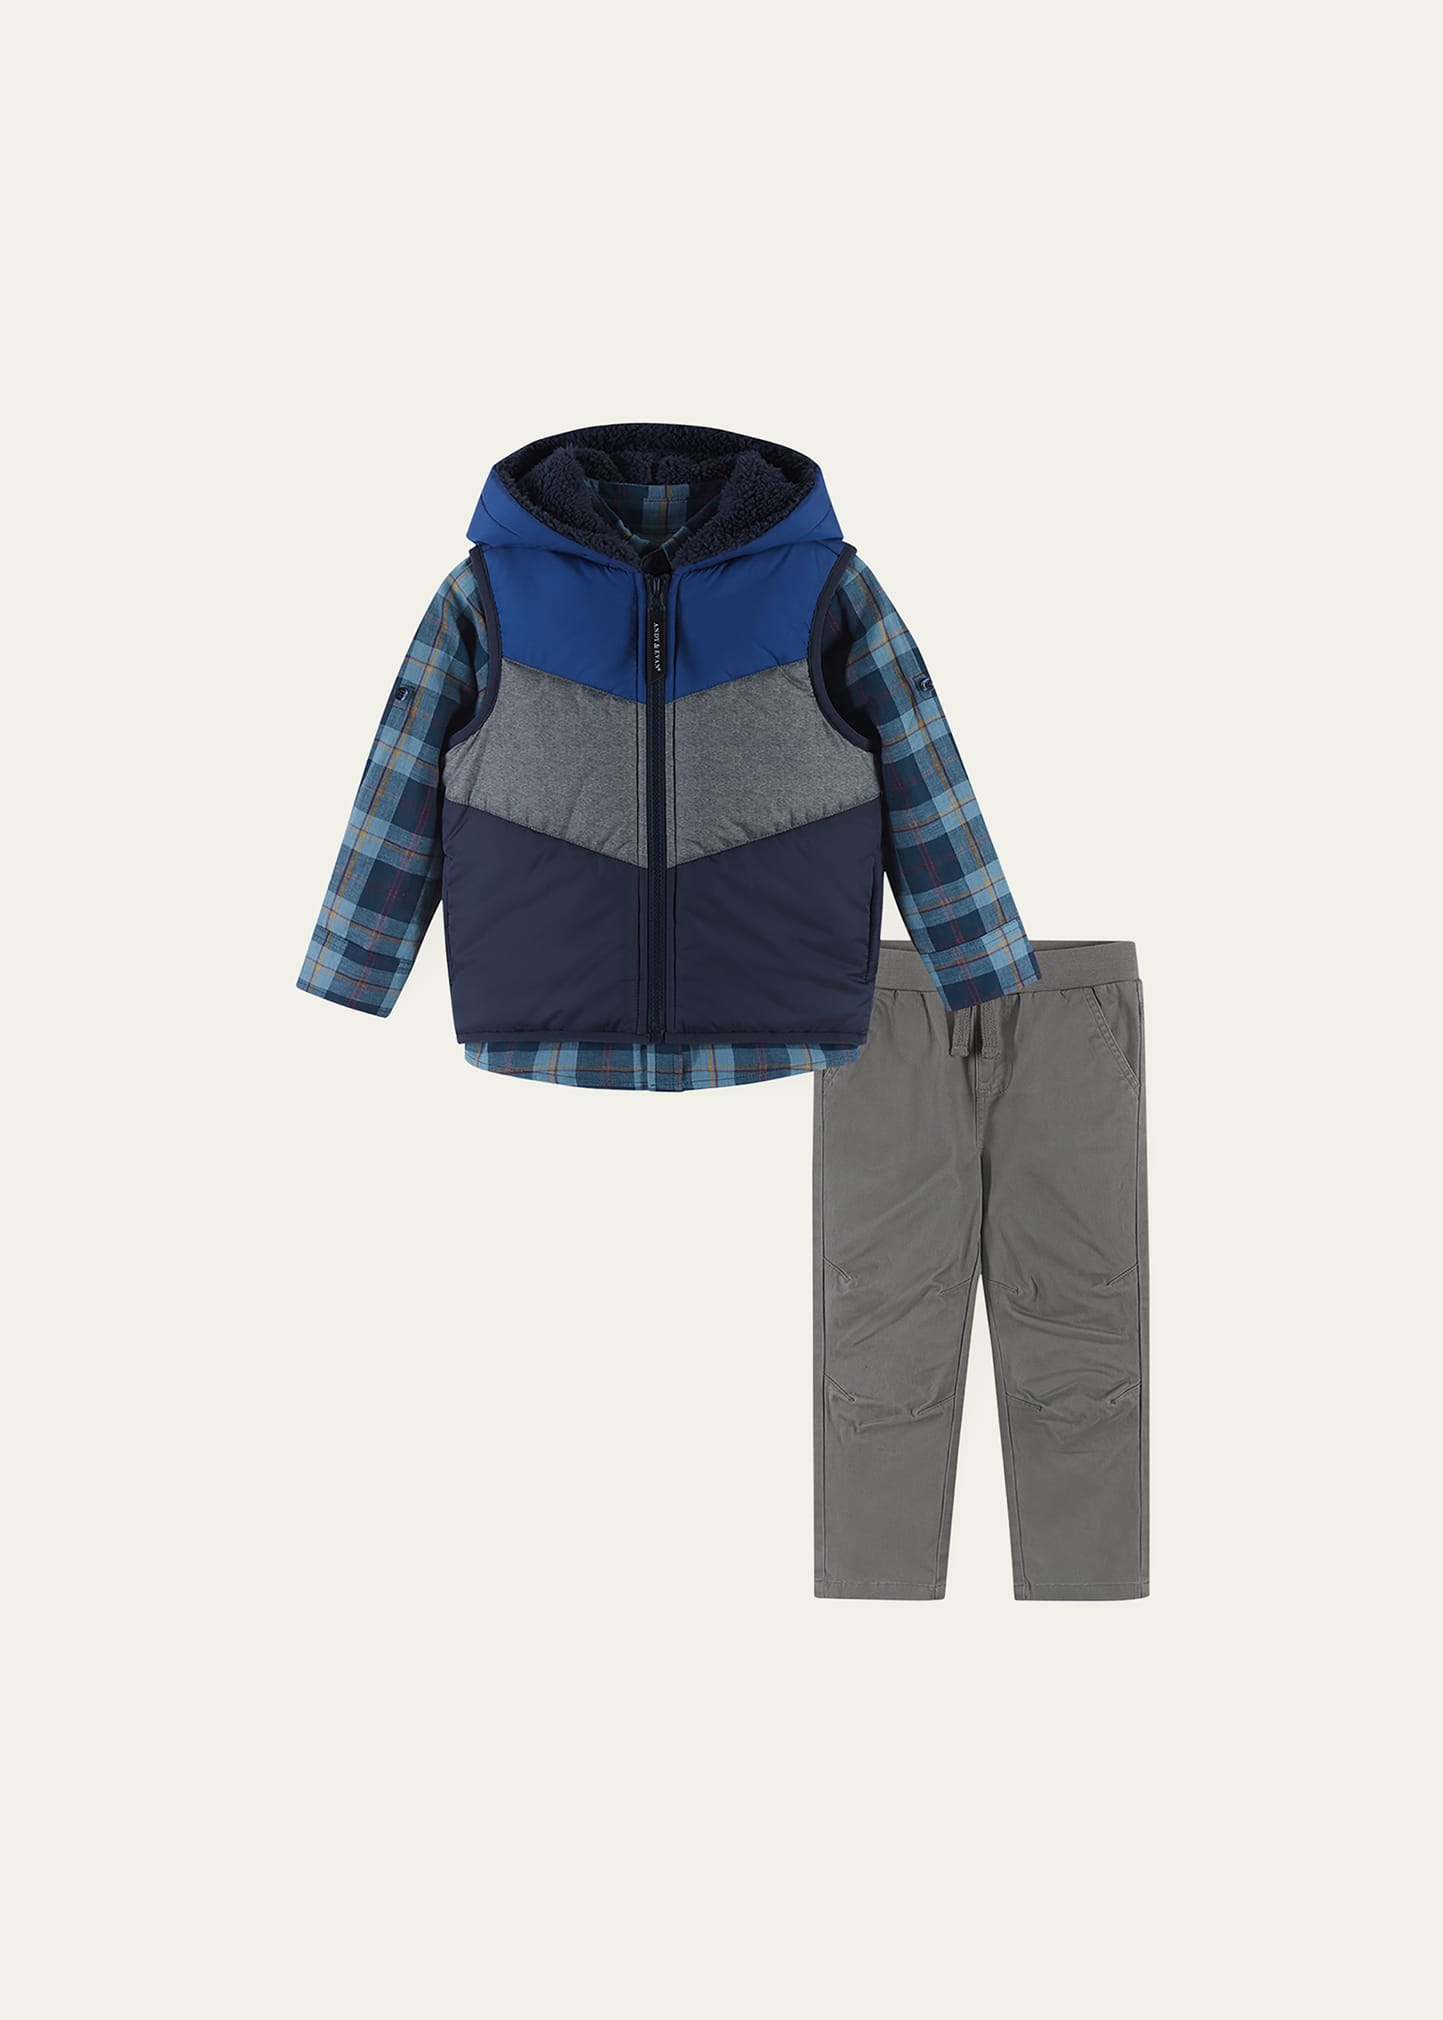 Shop Andy & Evan Boy's Hooded Puffer Vest W/ Shirt & Joggers Set In Blue Grey Plaid